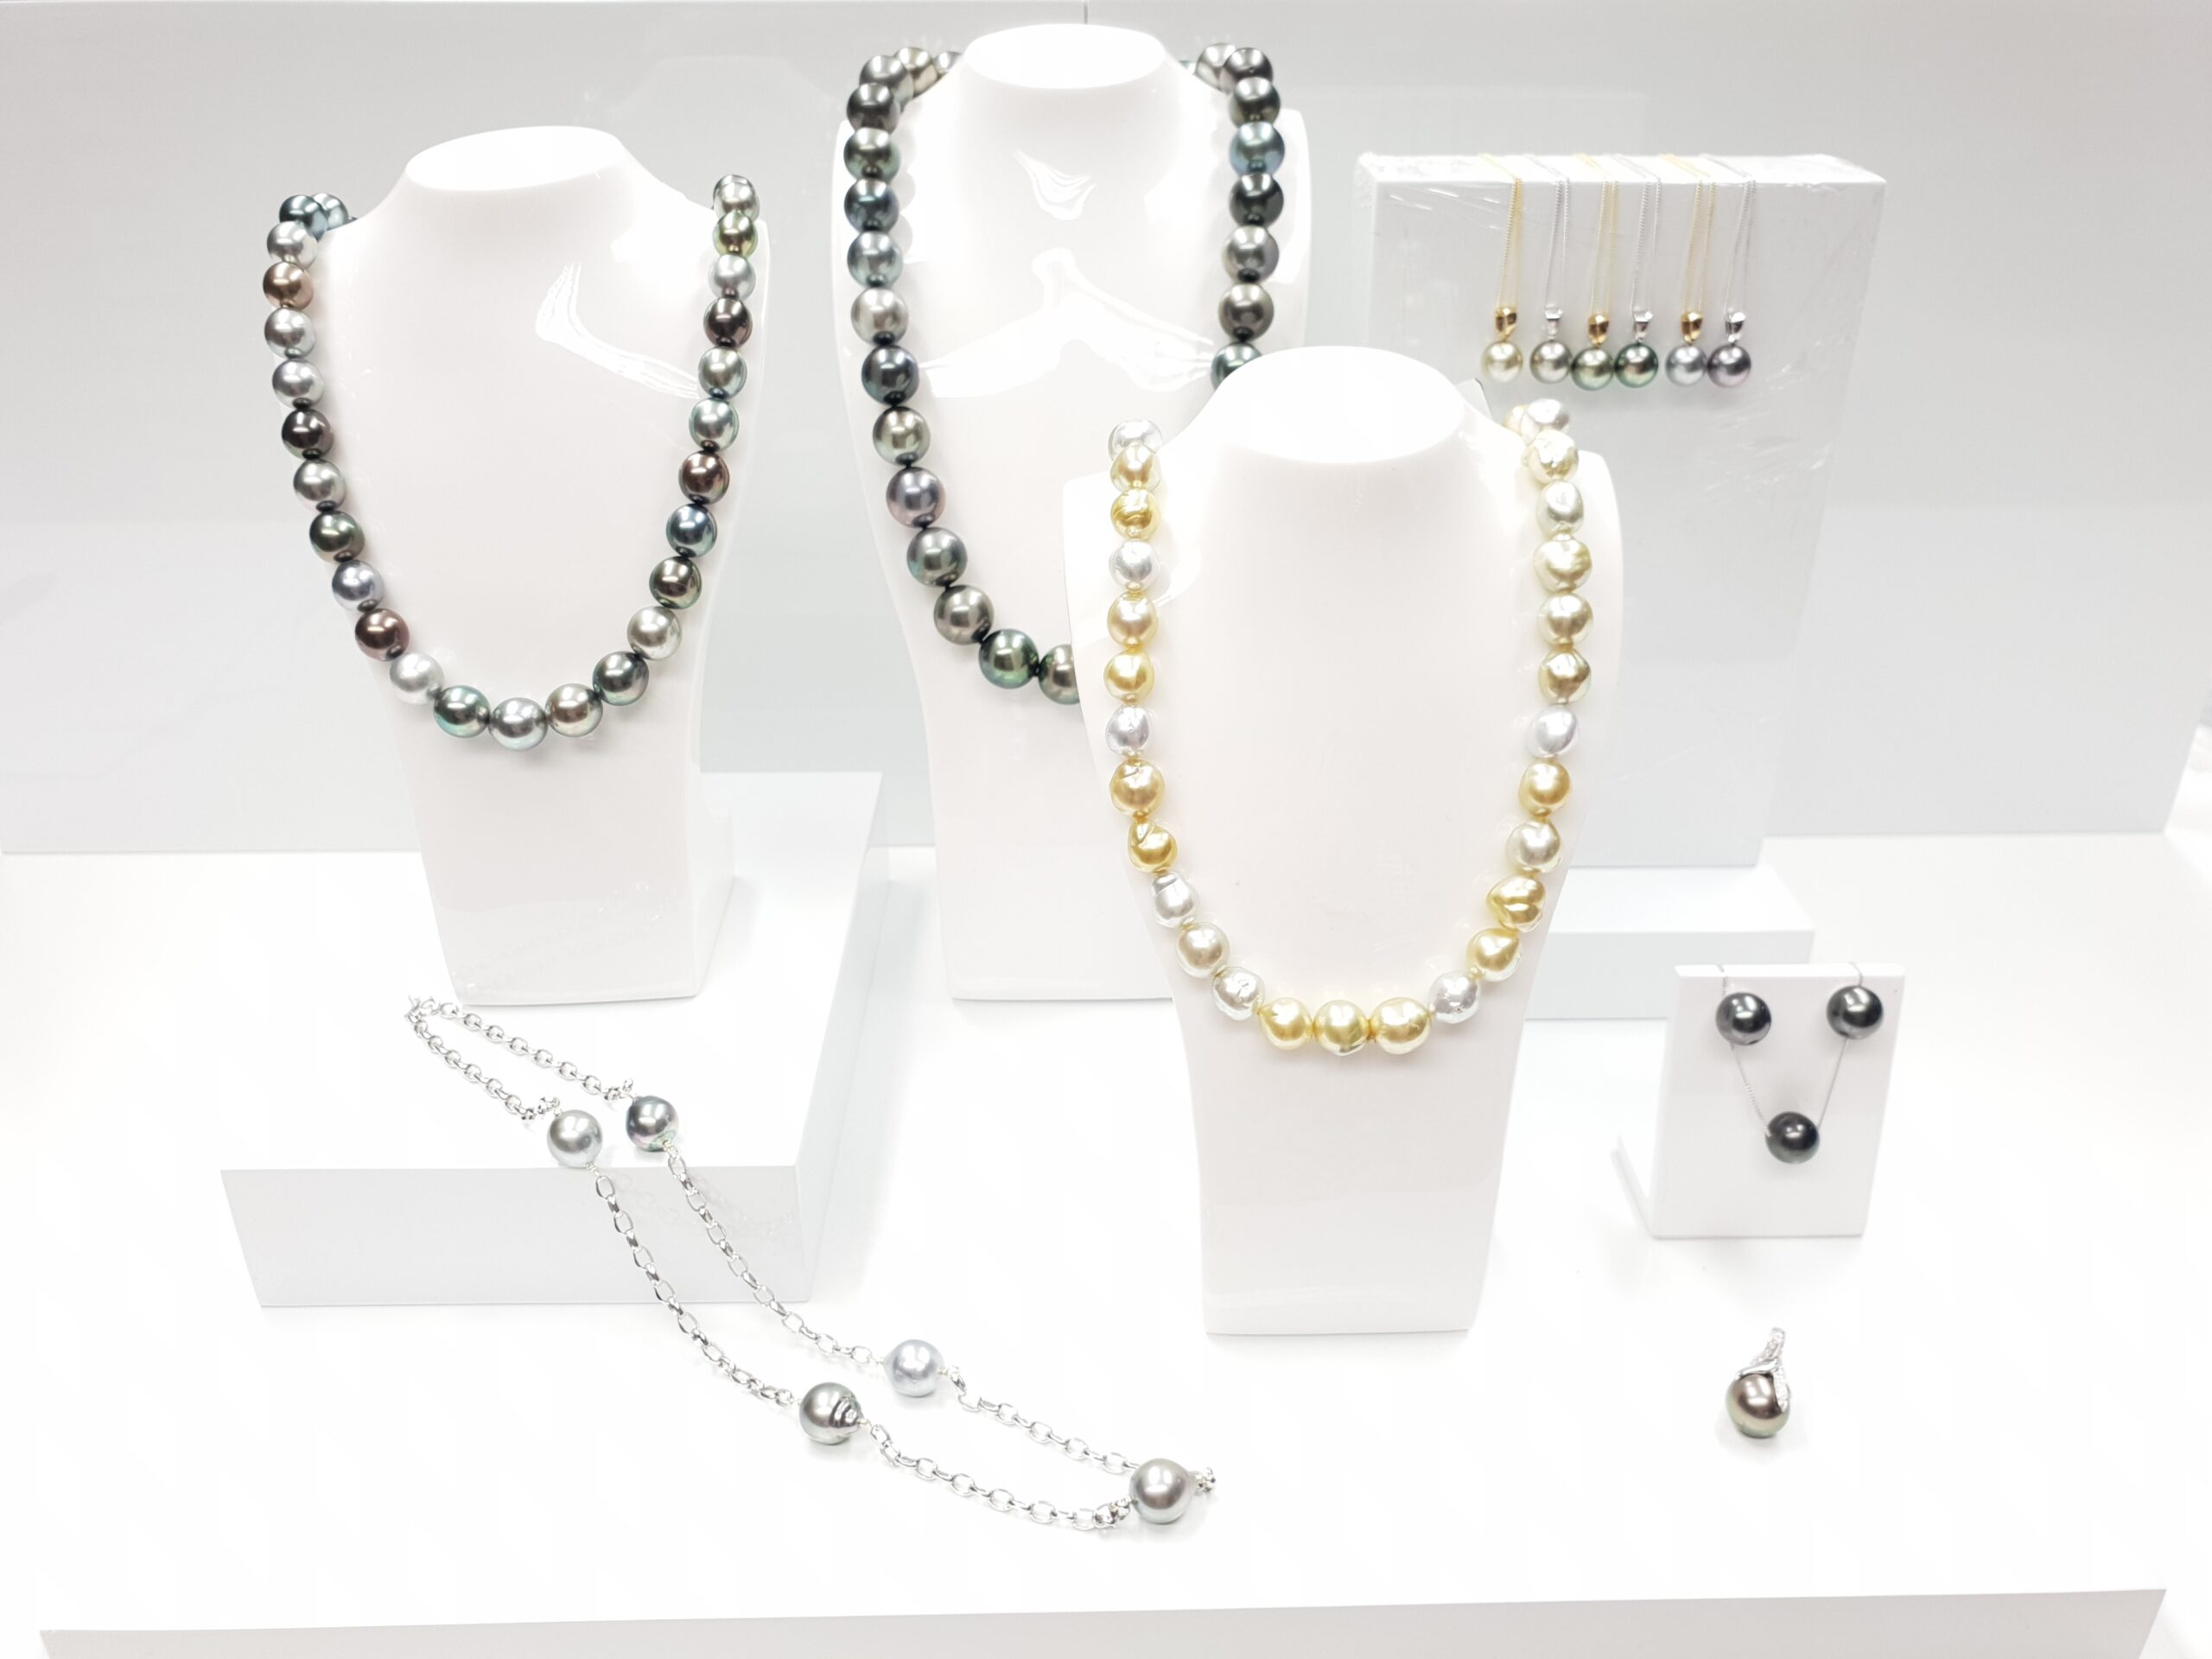 Tips on how to display pearls in your jewellery shop